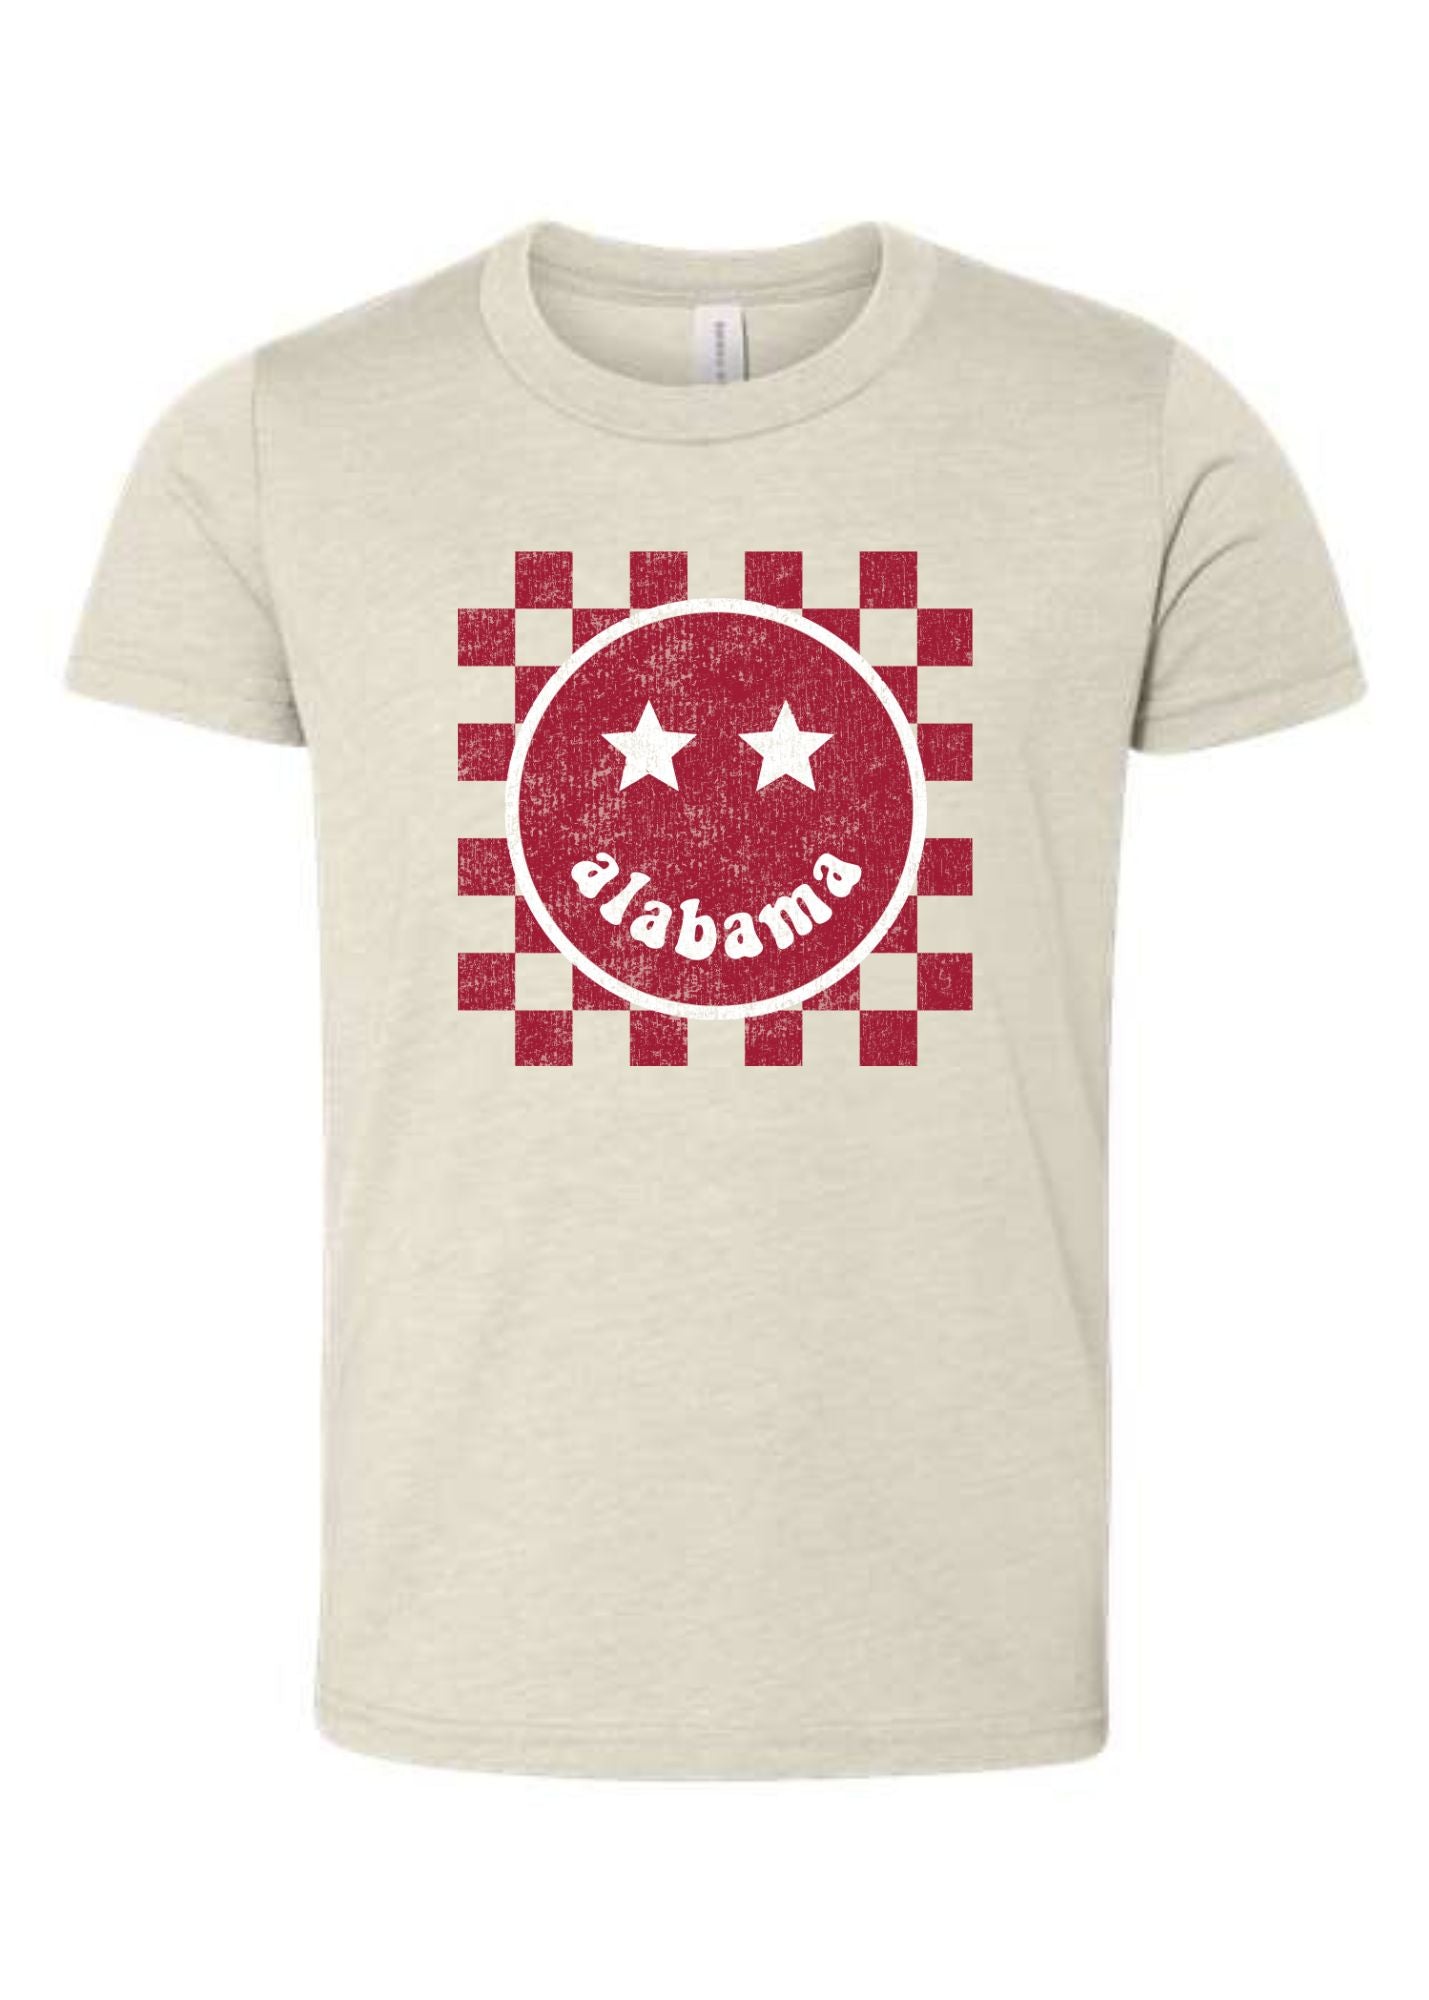 Alabama Happy Checkered | Tee | Kids-Sister Shirts-Sister Shirts, Cute & Custom Tees for Mama & Littles in Trussville, Alabama.